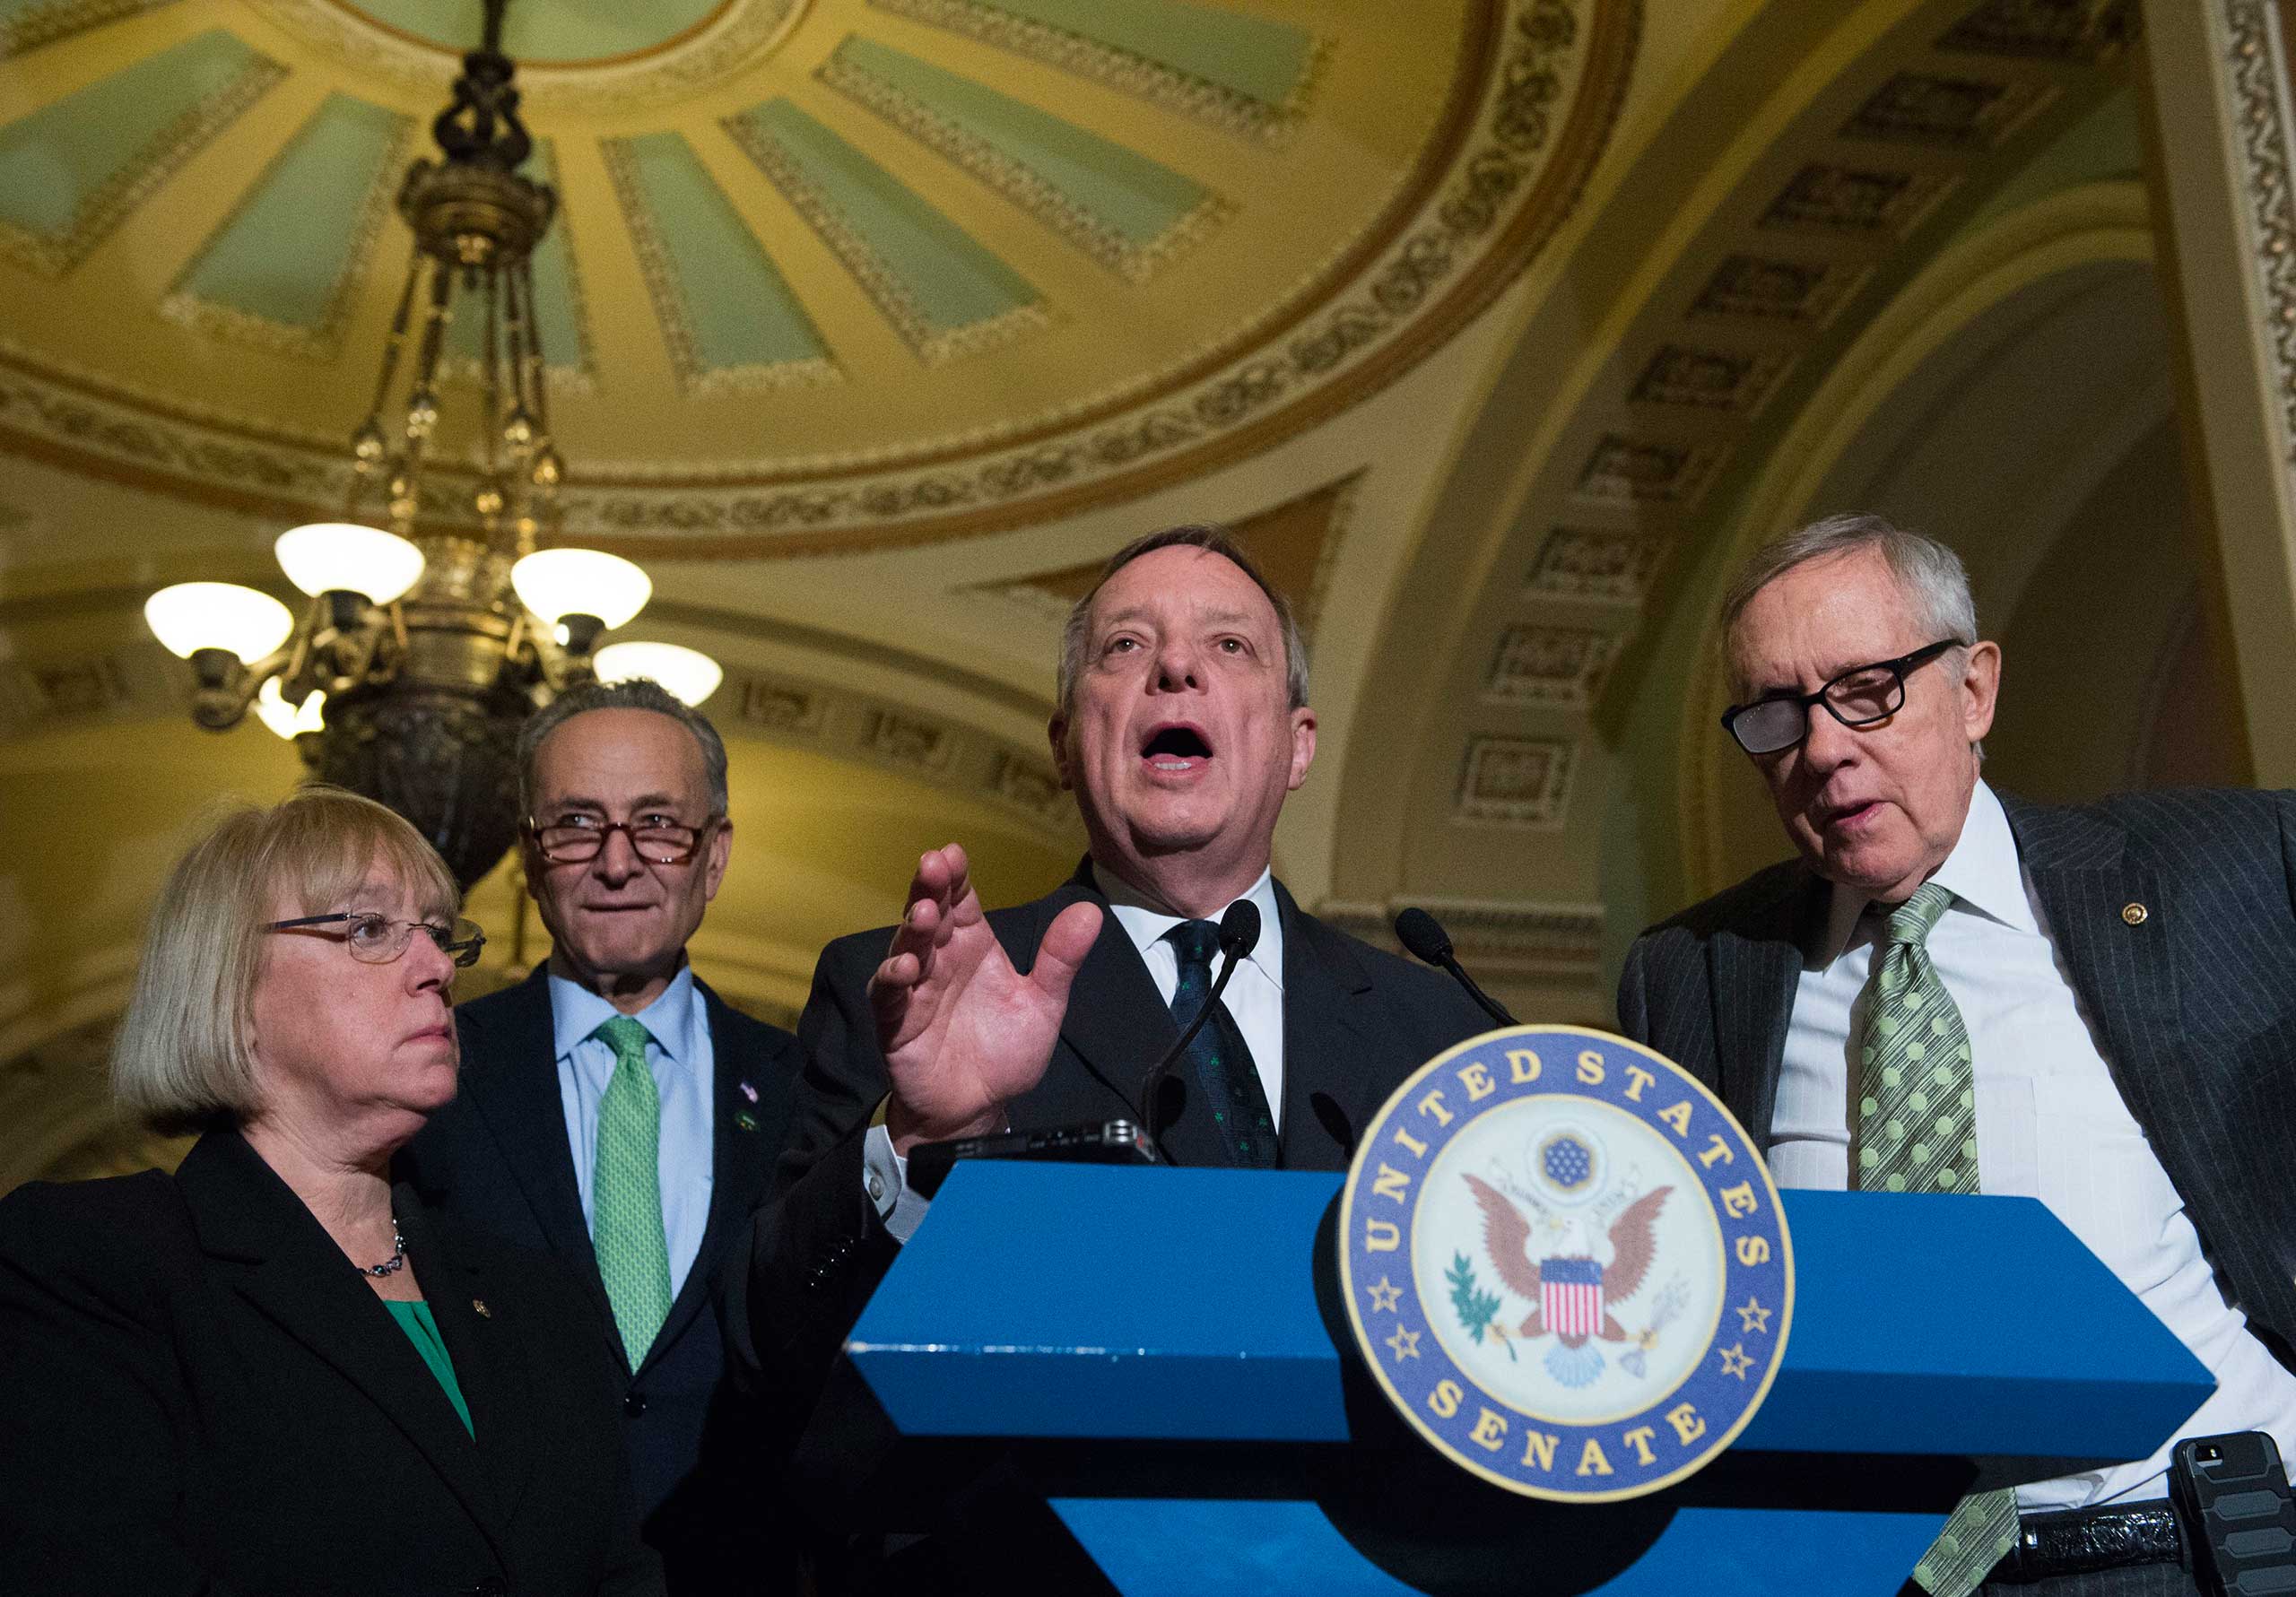 Senate Minority Whip Richard Durbin, D-Ill., speaks to reporters on Capitol Hill in Washington on March 17, 2015. From left are, Sen. Patty Murray, D-Wash., Sen. Charles Schumer, D-N.Y. Durbin, and Senate Minority Leader Harry Reid of Nev.